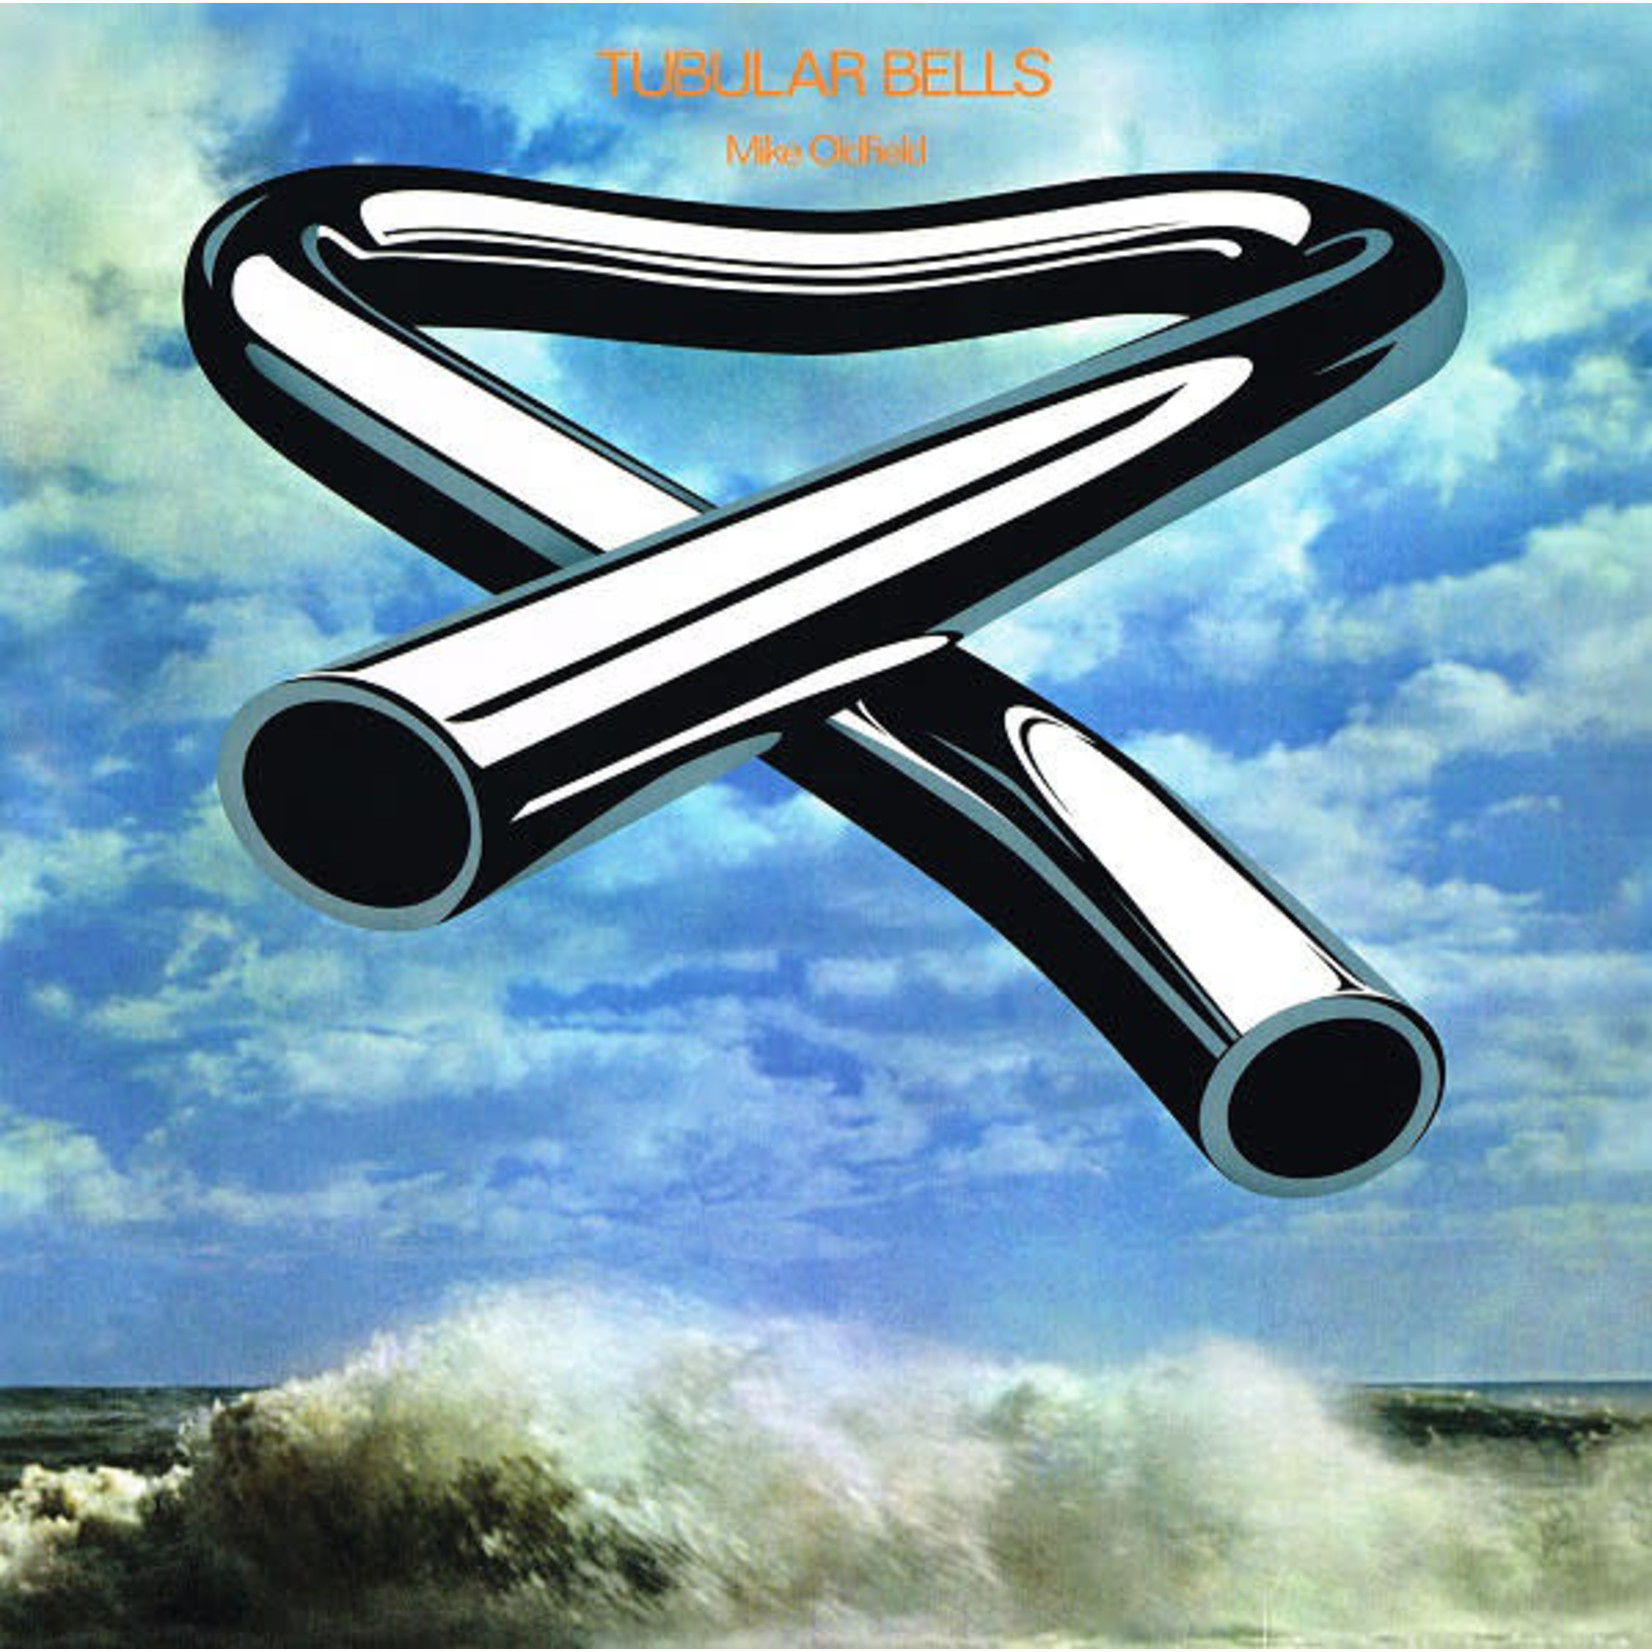 [Vintage] Mike Oldfield - Tubular Bells (the Exorcist theme)